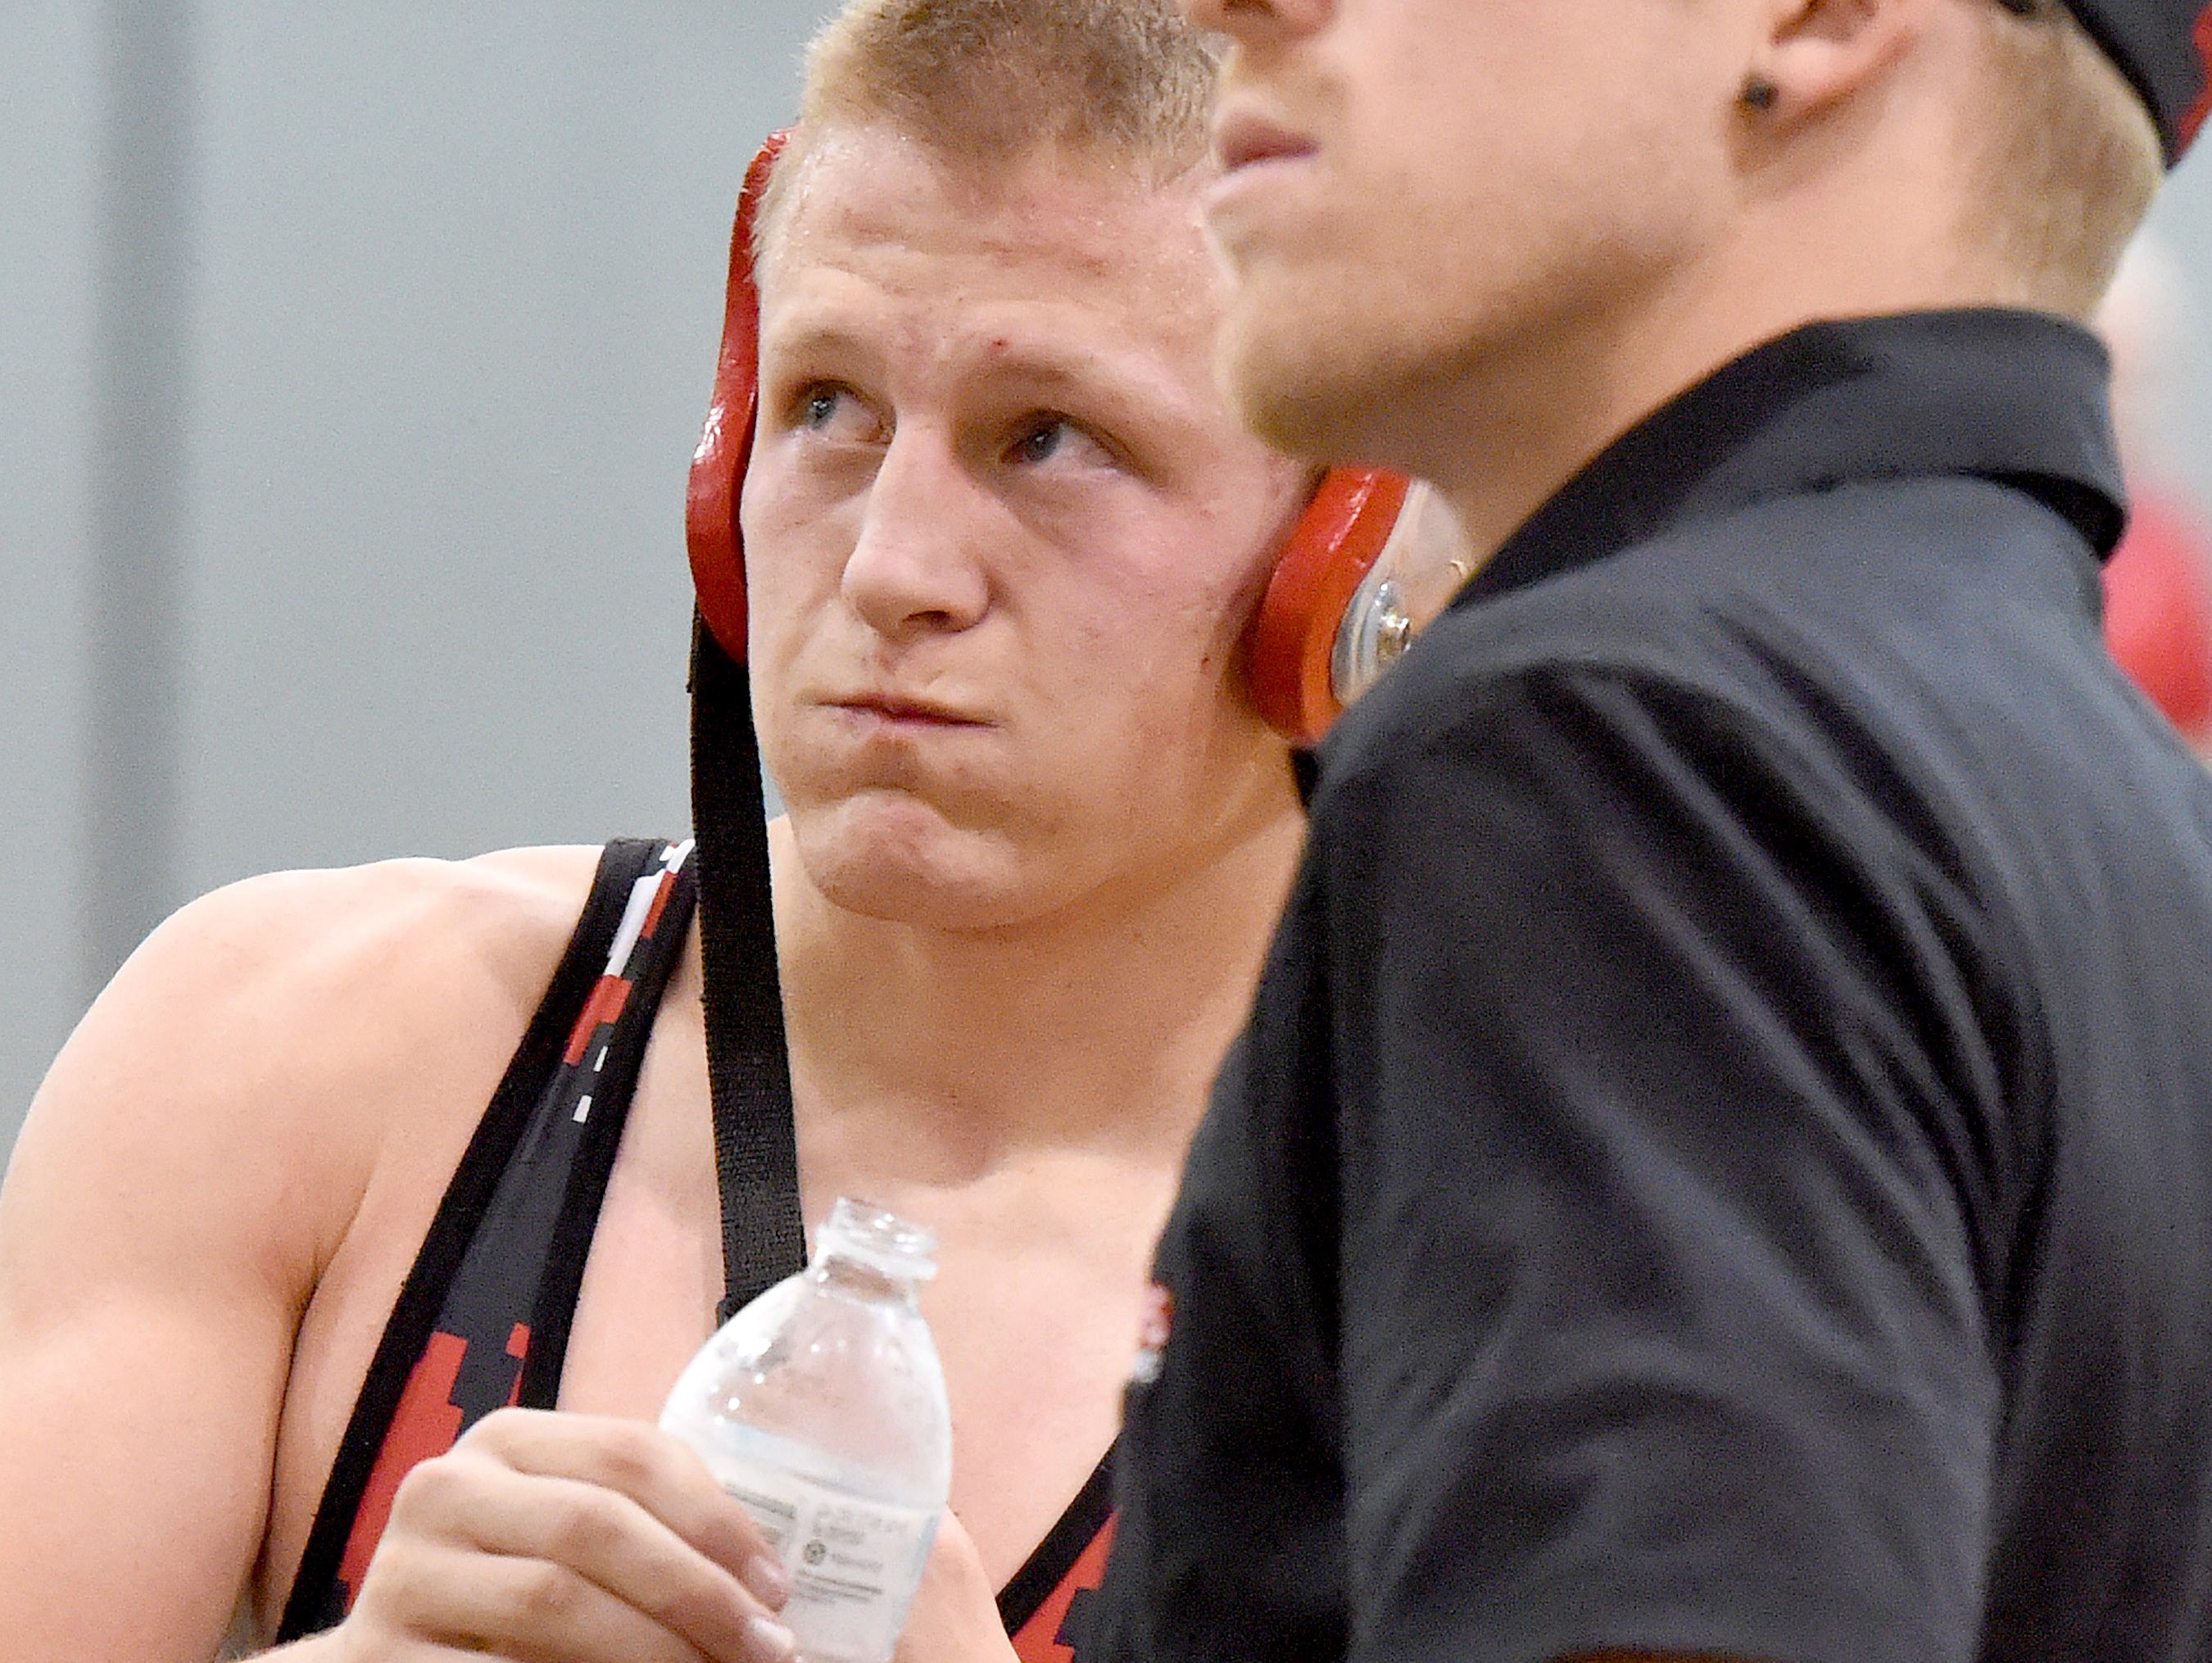 Riverheads' Garret Shultz looks to the scoreboard as he drinks water and talks to one of his coaches during a break in his match against Buffalo Gap's Josh Stagner in a 145-pound weight class during the Bison Wrestling Quad in Swoope on Wednesday, Jan. 6, 2016. Shultz won the match.